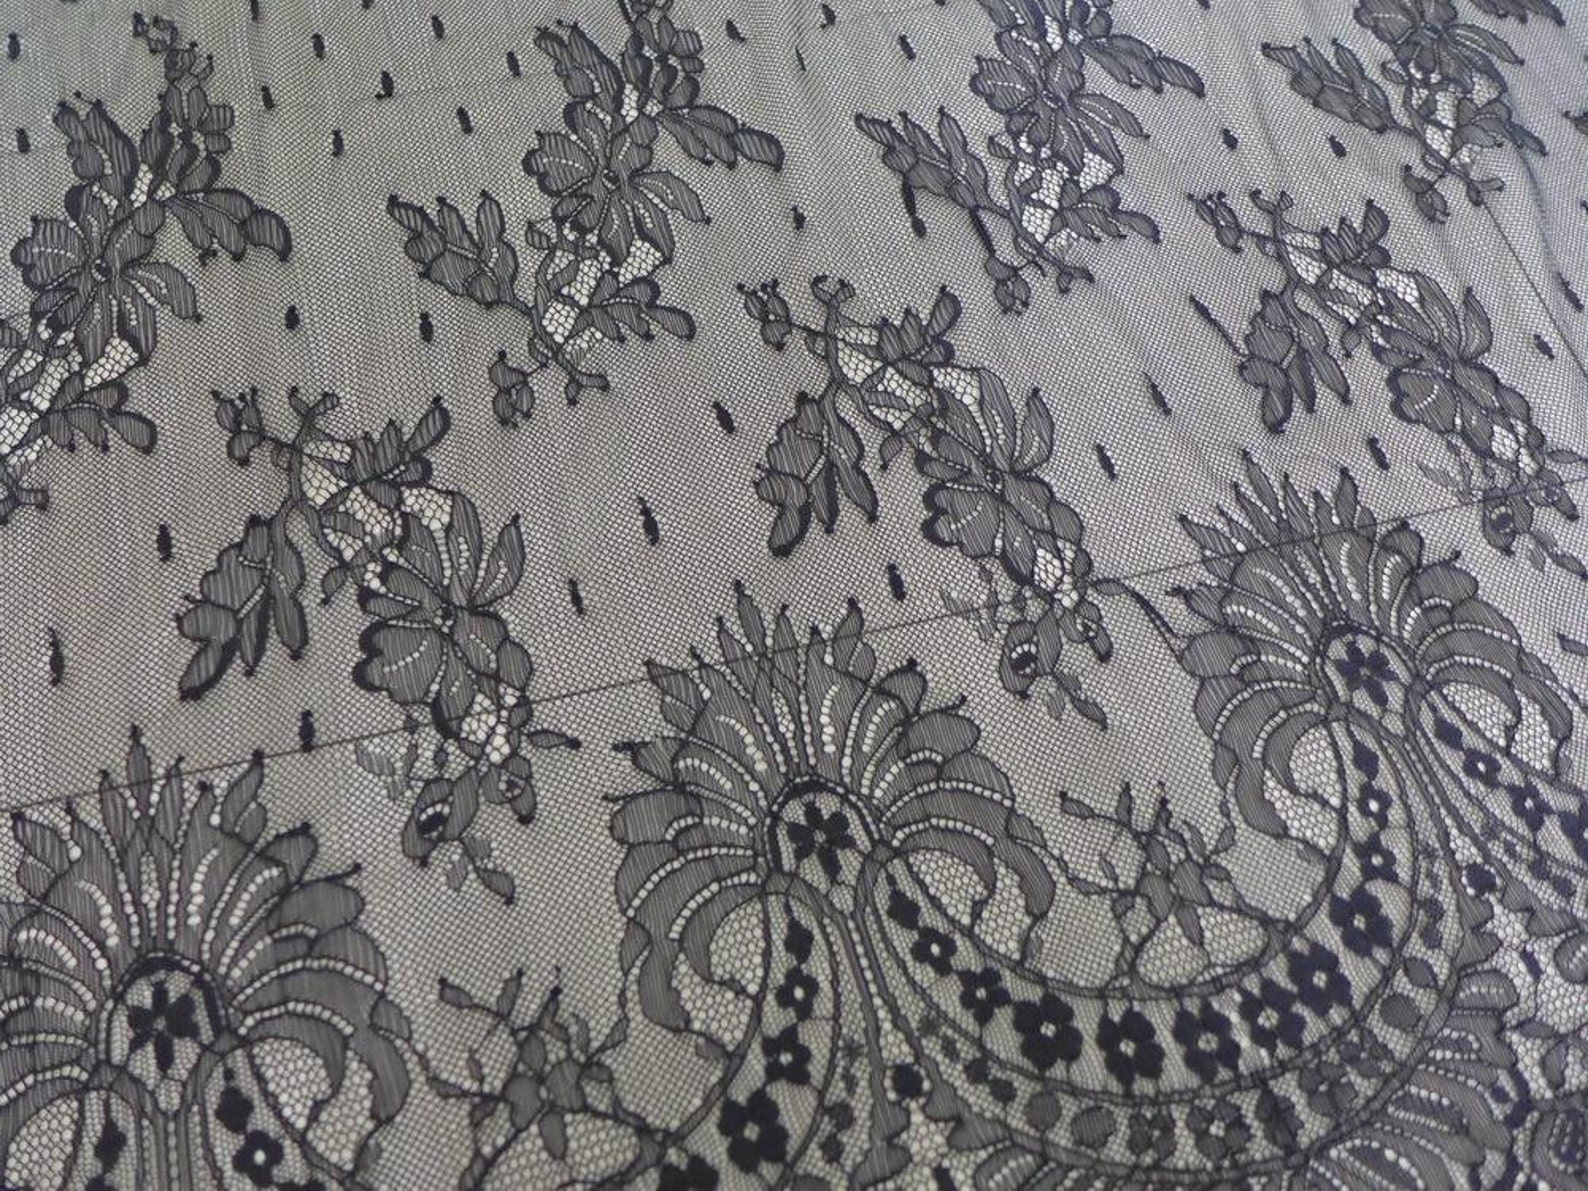 Black Embroidery Fabric Vintage Dots Lace Fabric Little | Etsy